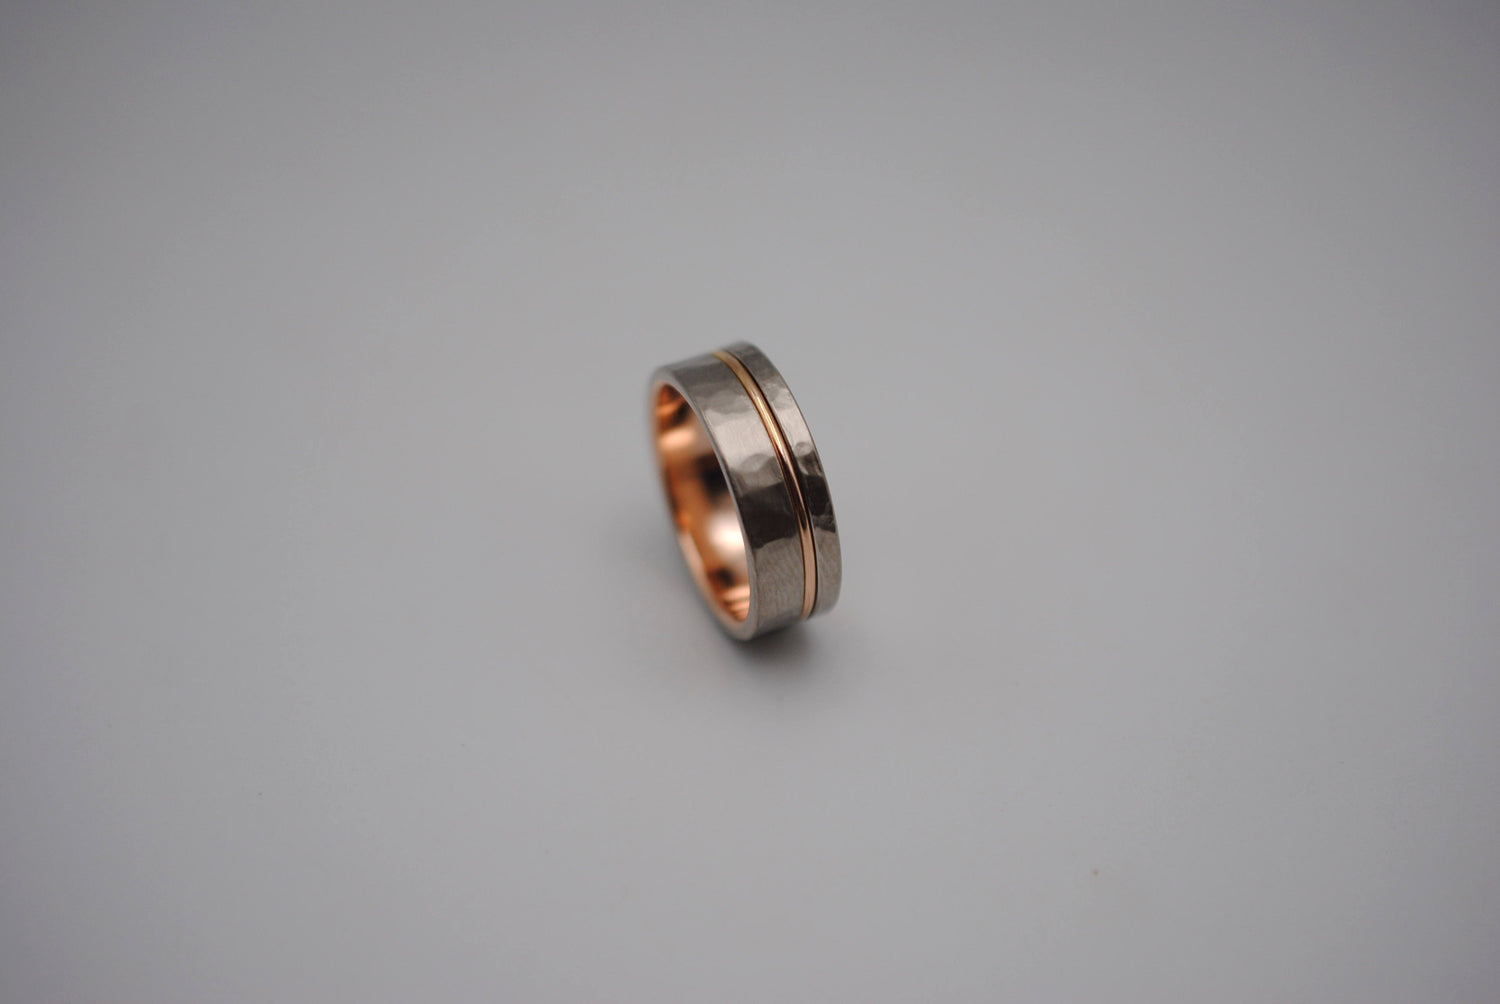 A men's styled wedding ring band. It's Palladium White Gold (a beautiful grey color) with a Rose Gold Inlay. It is hammred textured and brushed finished.